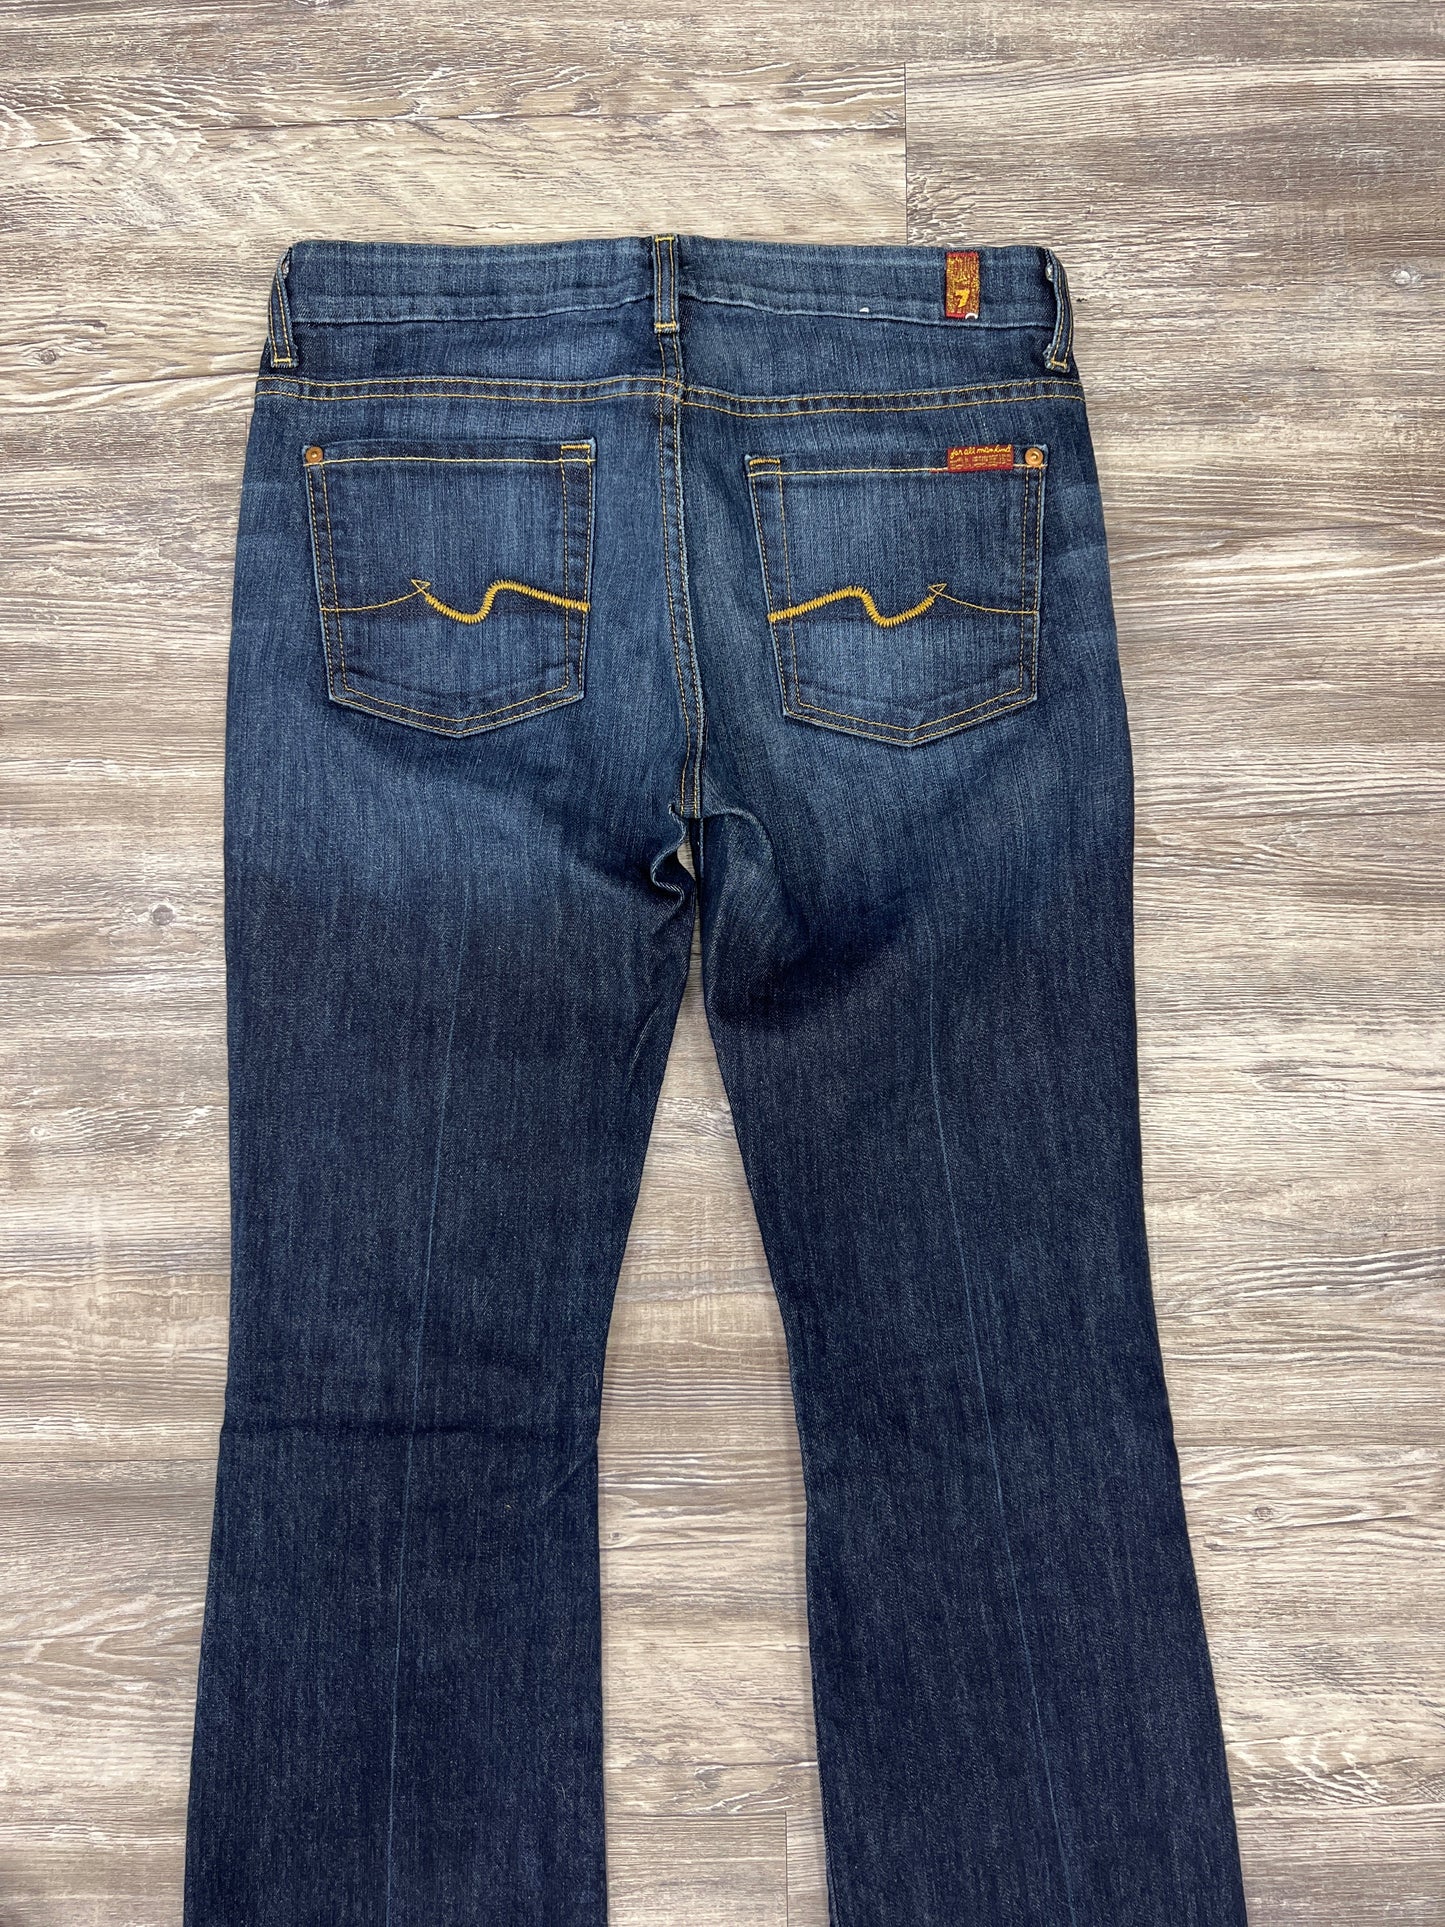 Jeans Designer By 7 For All Mankind Size: 8